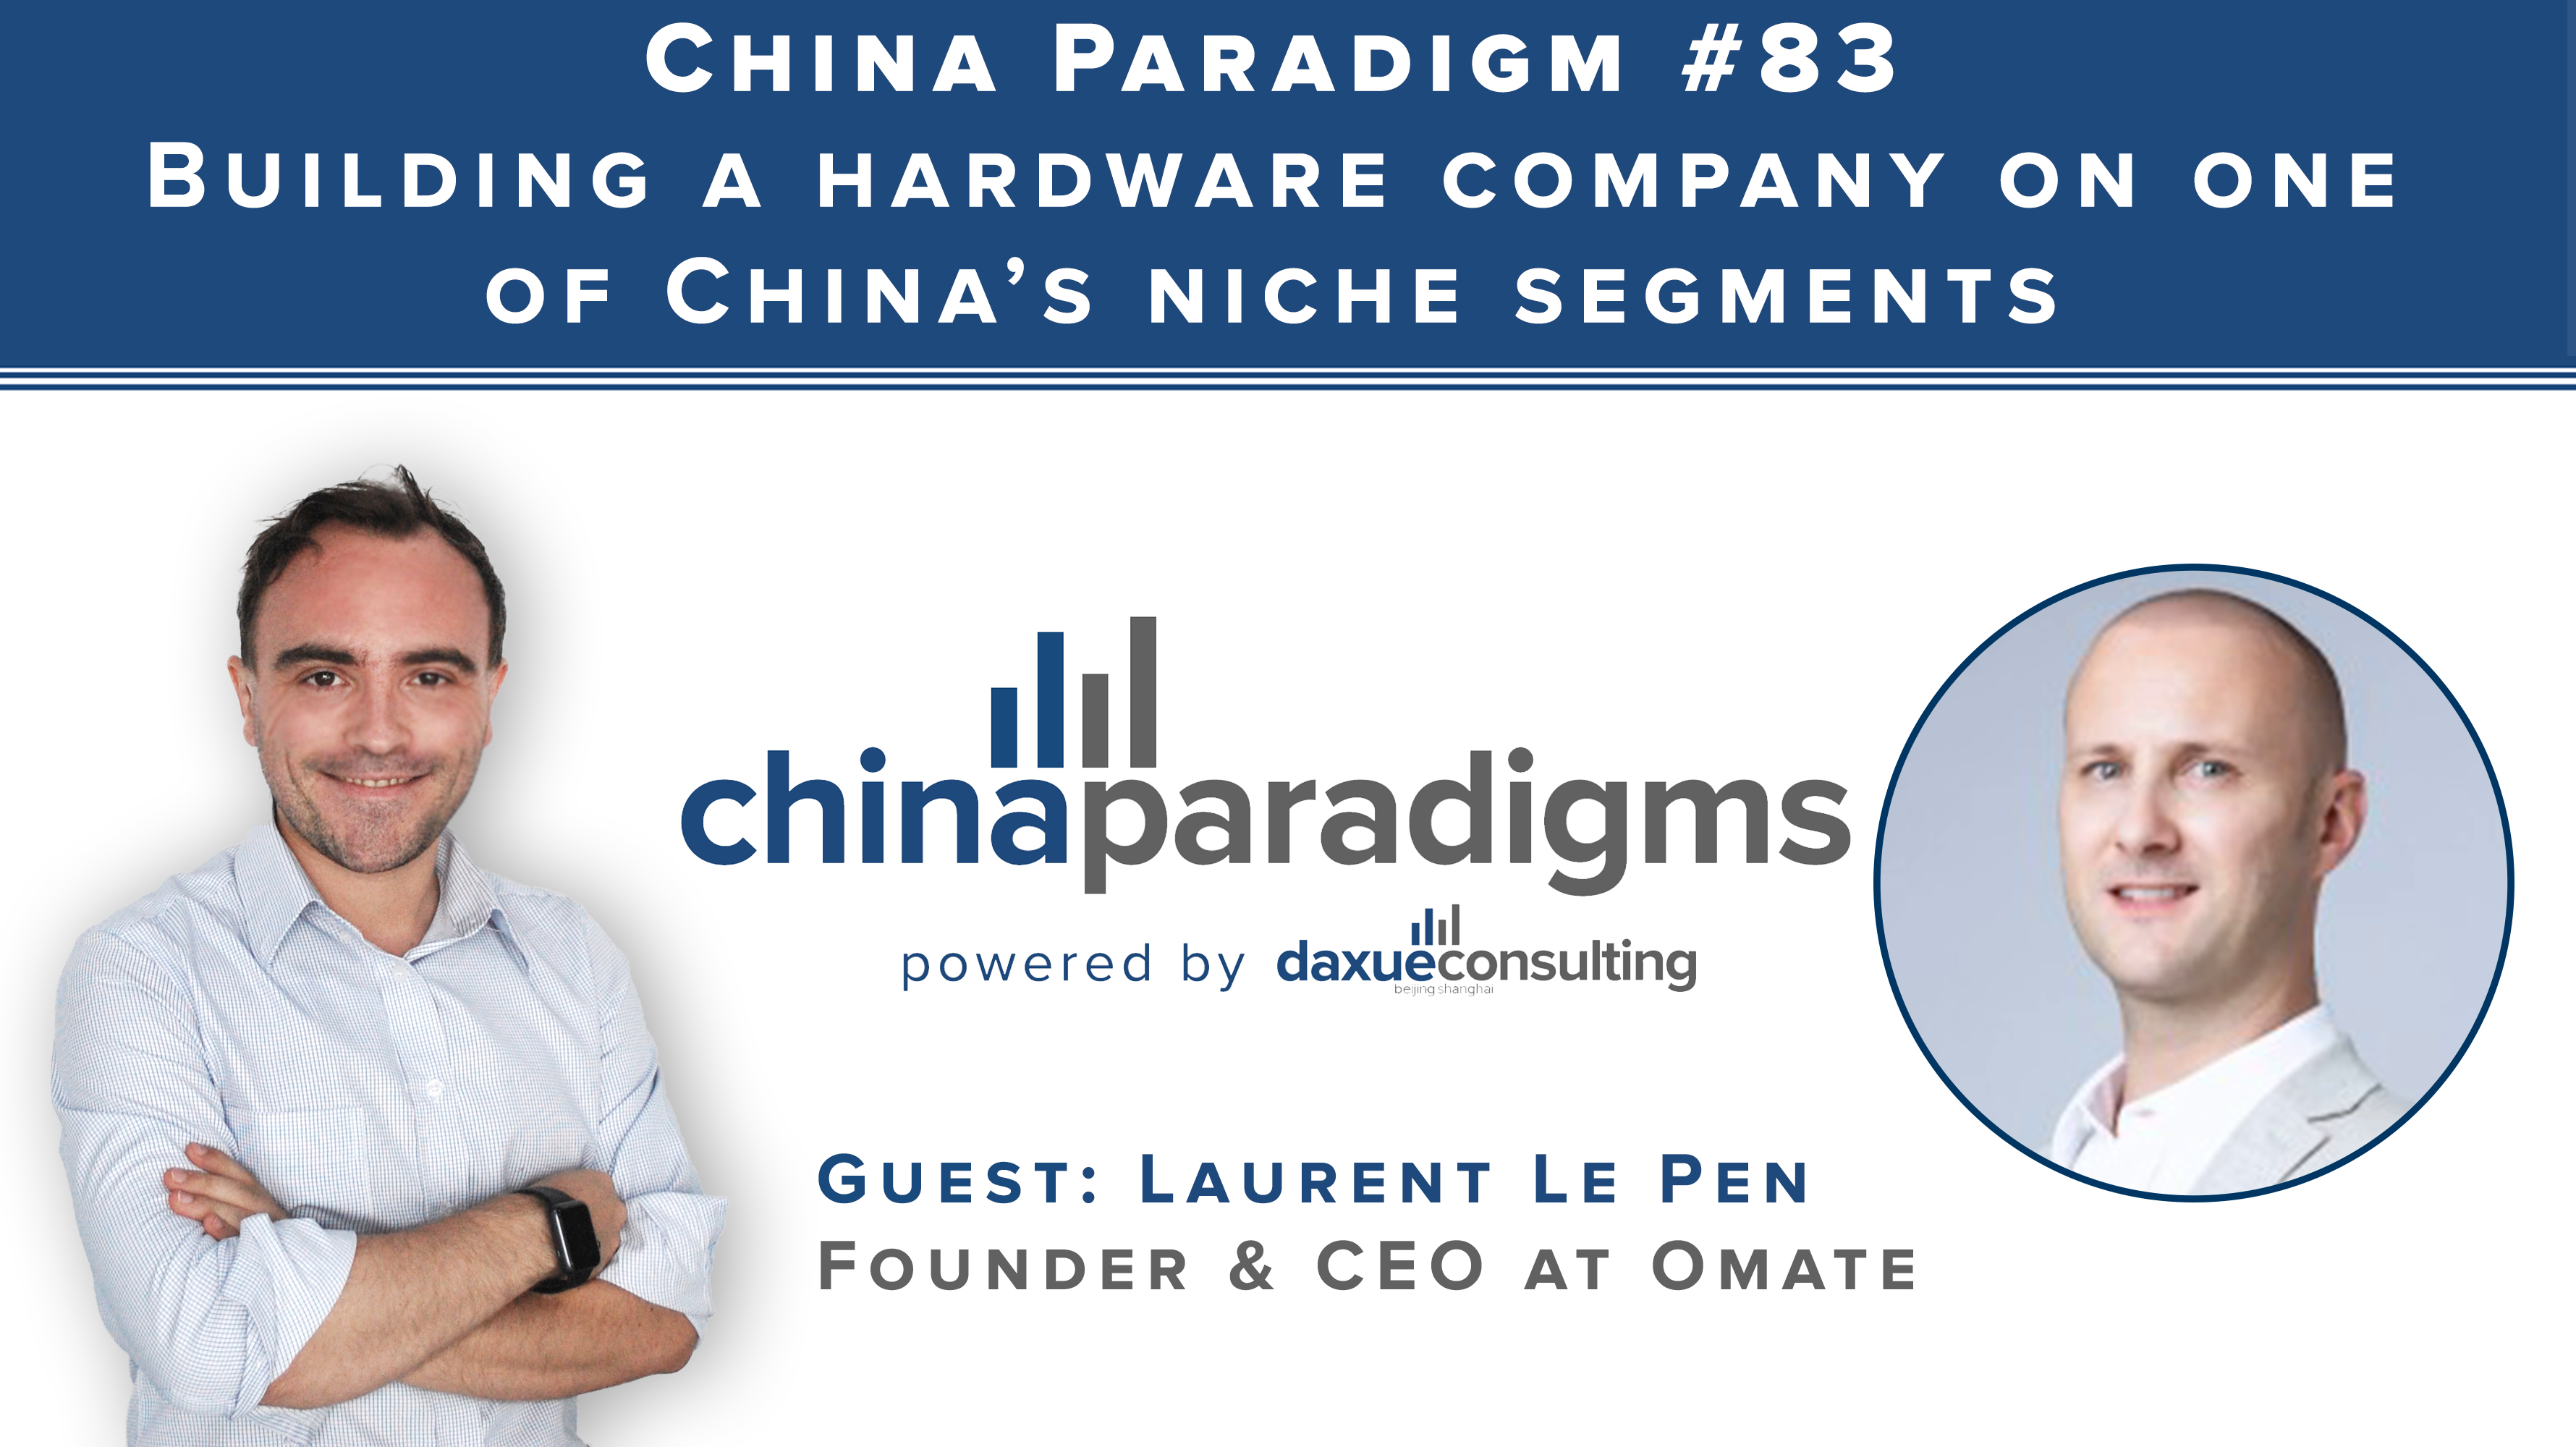 China Paradigm 83: Building a hardware company on one of China’s niche segments